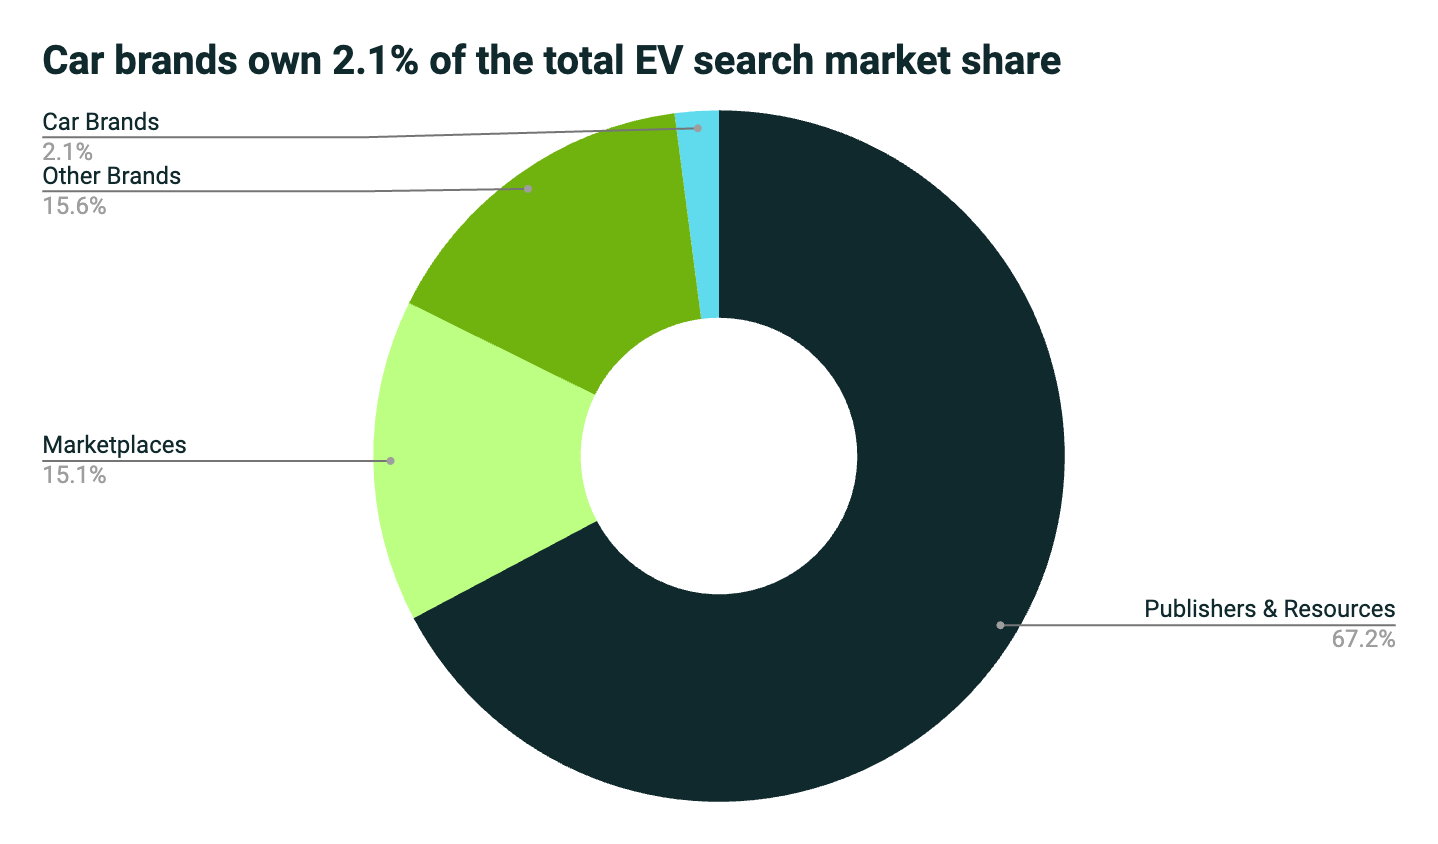 graph showing that car brands own 2.1% of the total electric vehicle market share